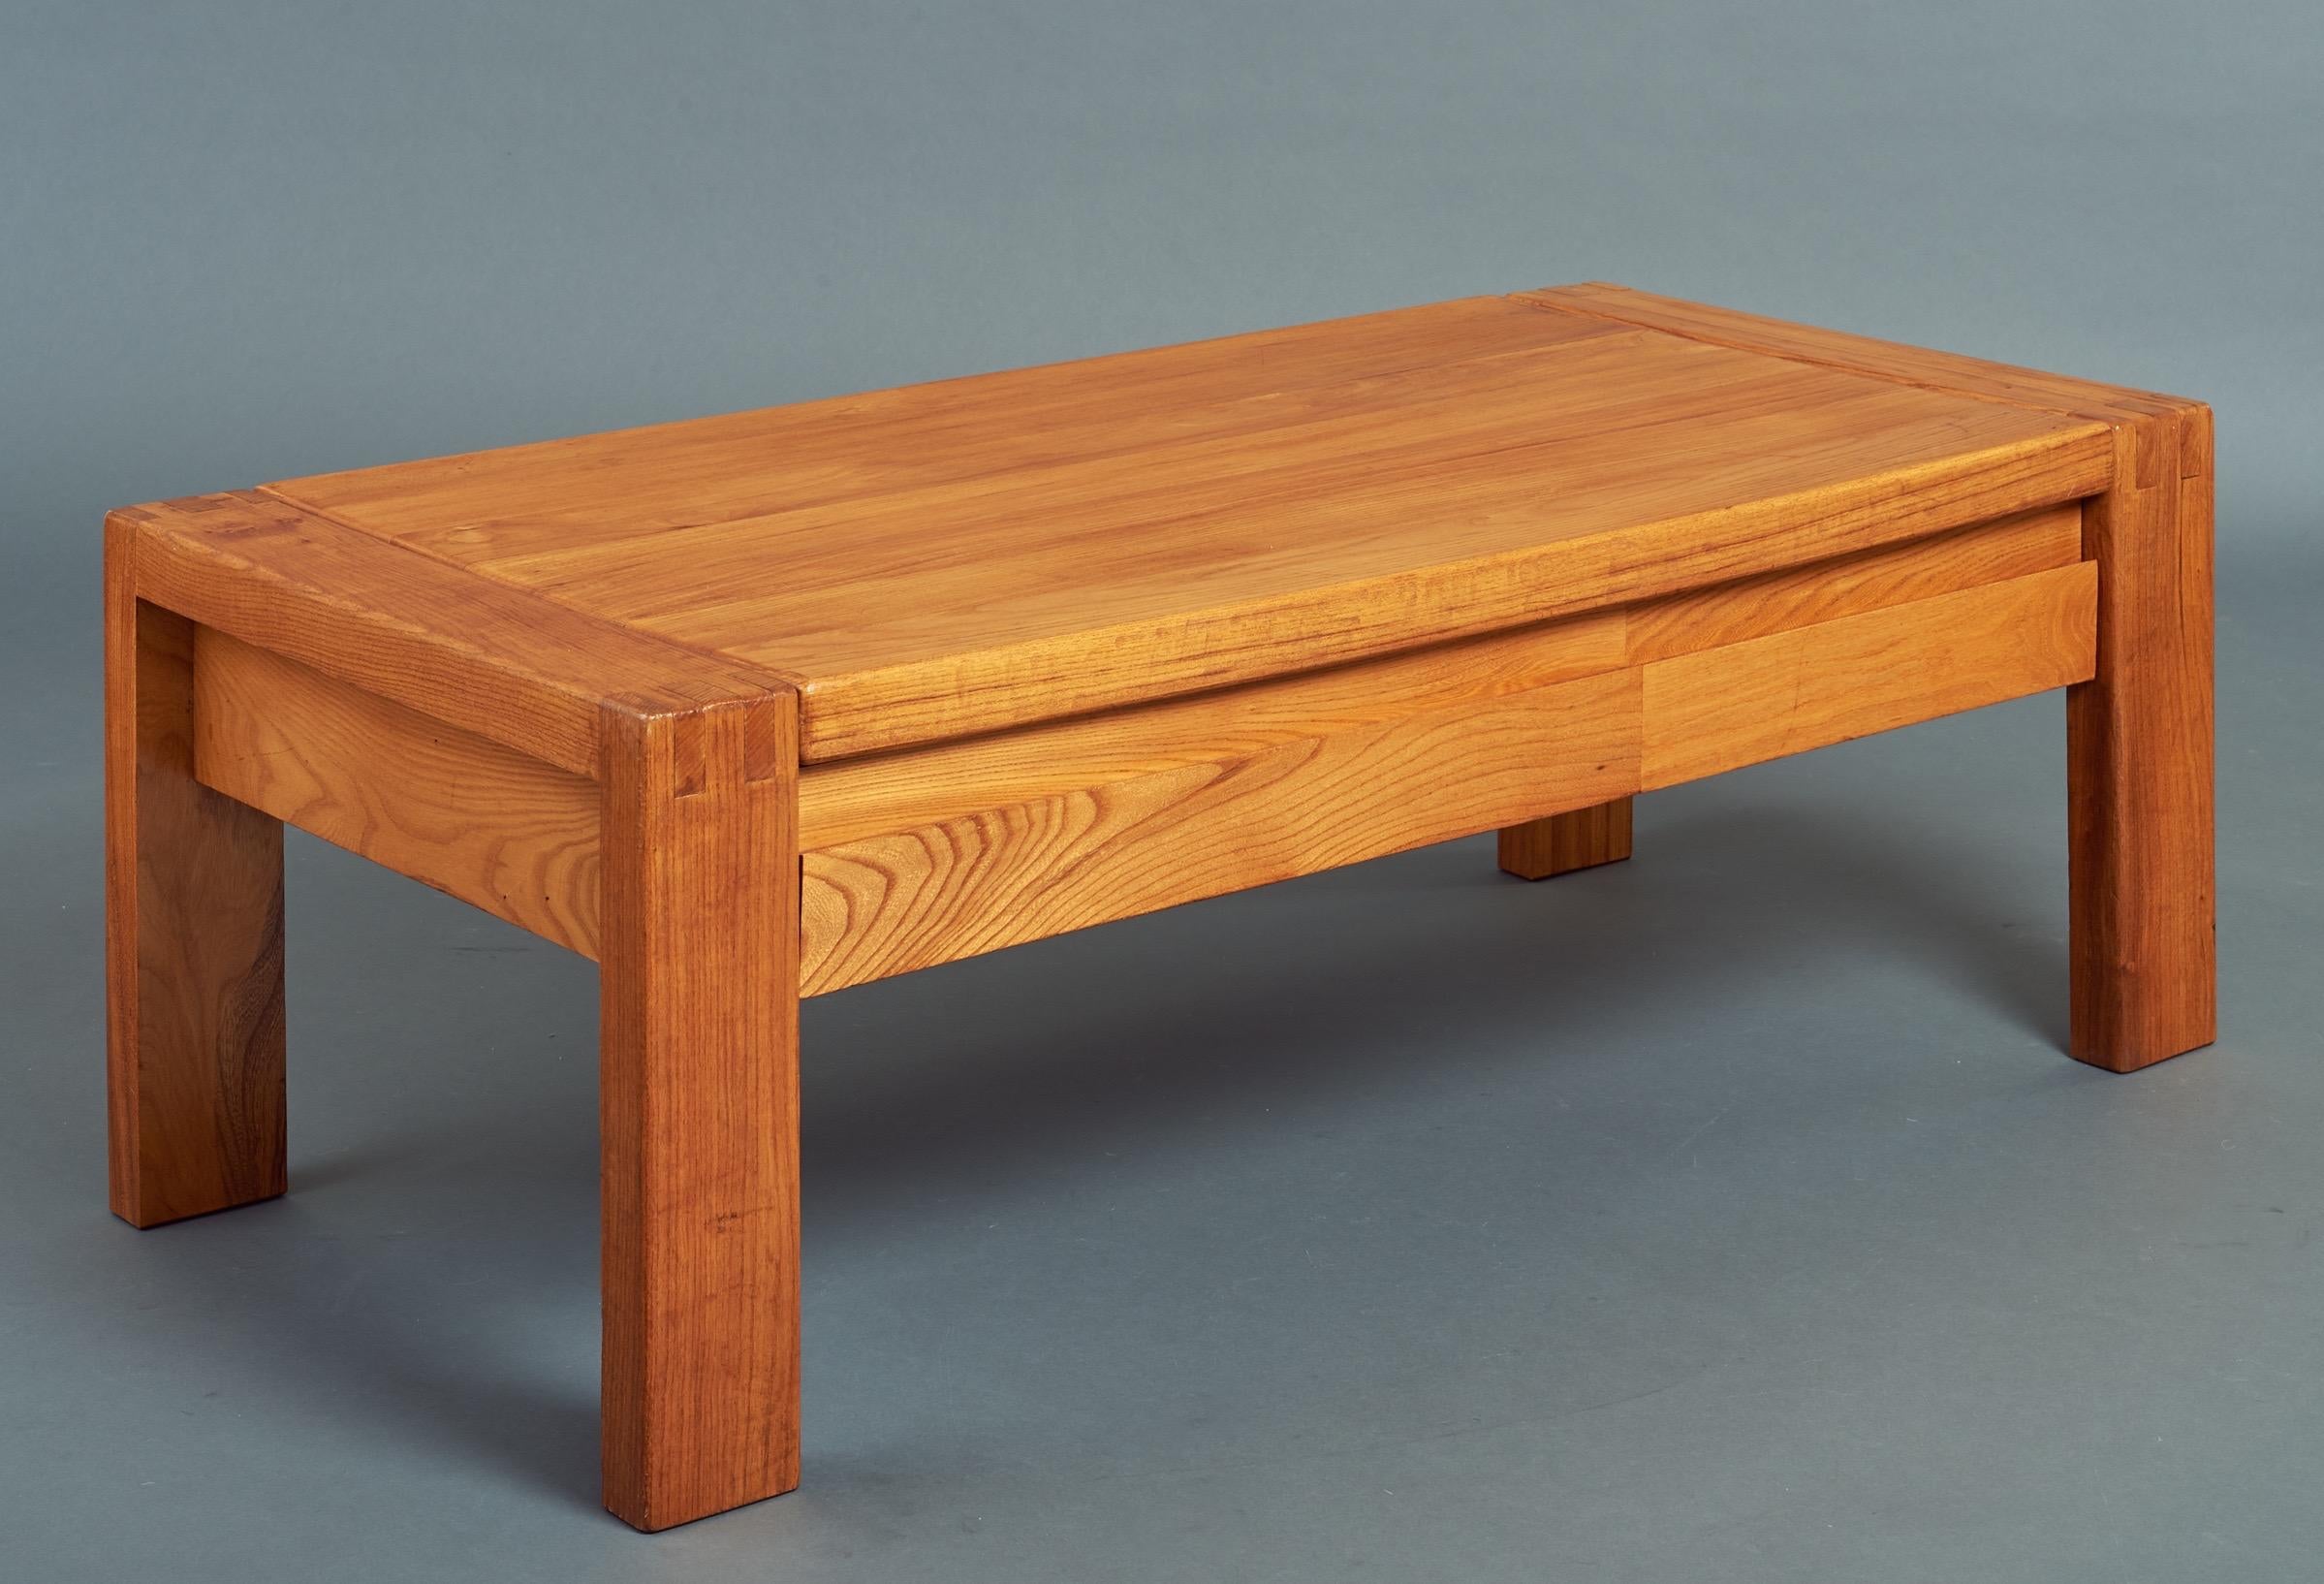 Pierre Chapo (1927-1987)

A two-drawer coffee table by master craftsman and woodworker Pierre Chapo, with beautiful exposed joinery in fitted oak. This piece is a compelling example of Chapo’s excellent cabinetry and stripped-down, essentialist